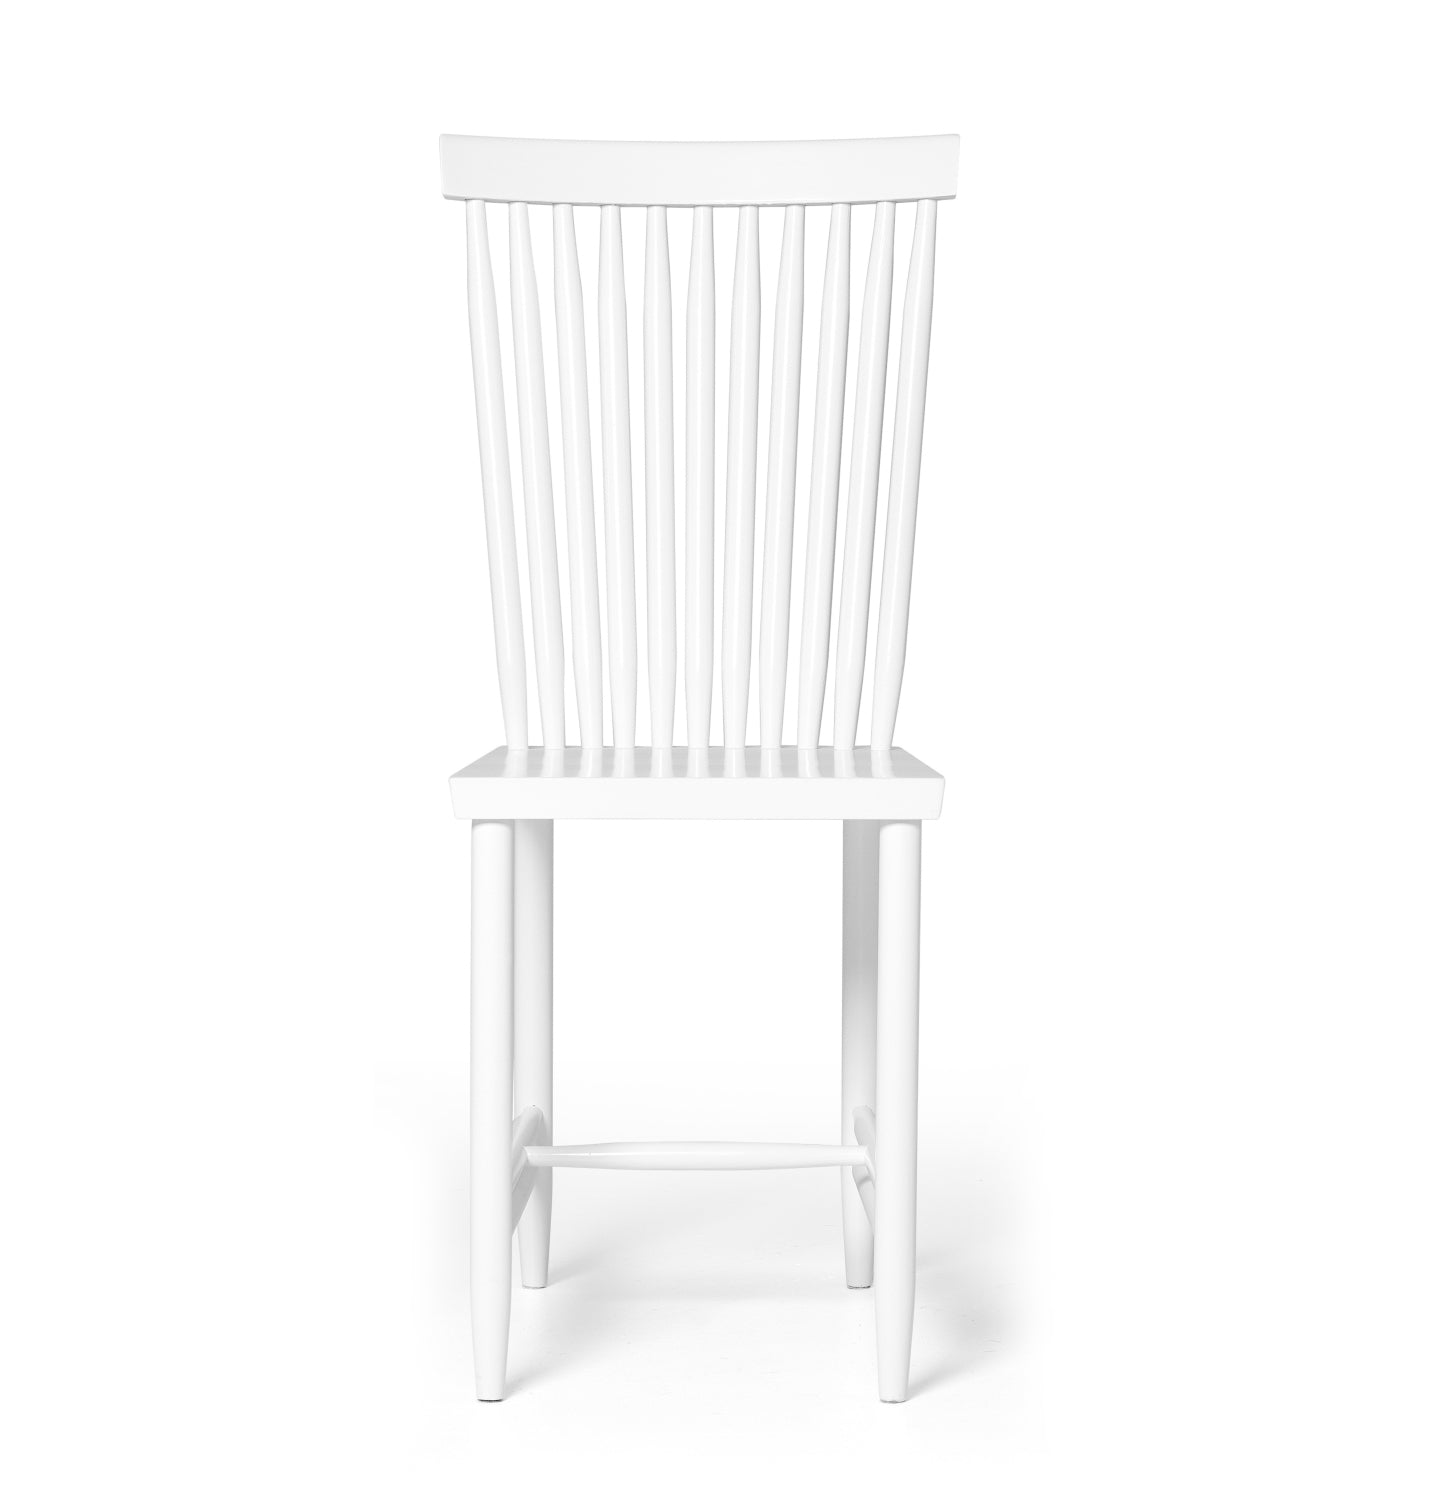 Family Chair 2. 1pc